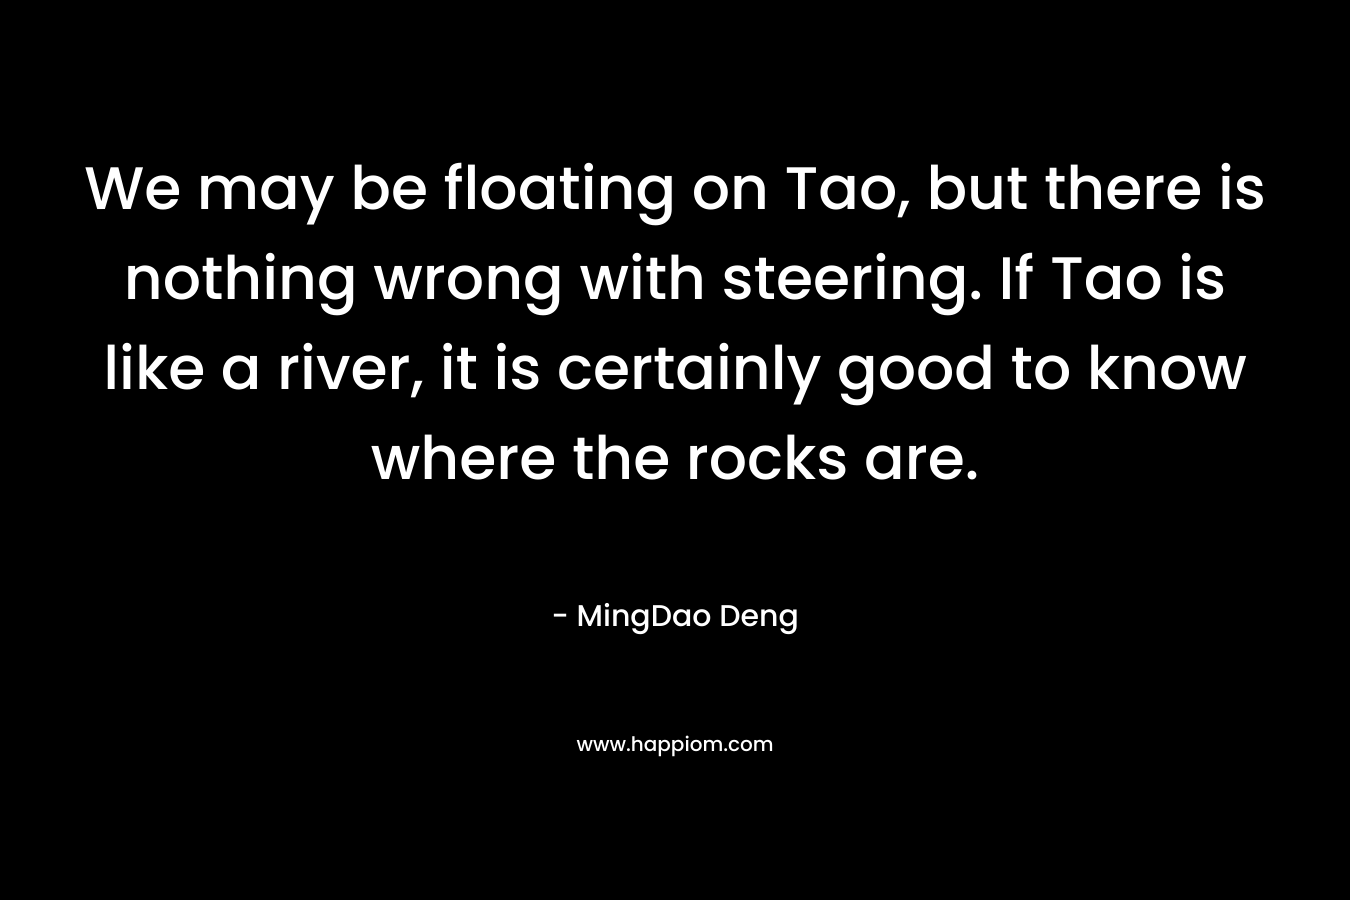 We may be floating on Tao, but there is nothing wrong with steering. If Tao is like a river, it is certainly good to know where the rocks are. – MingDao Deng